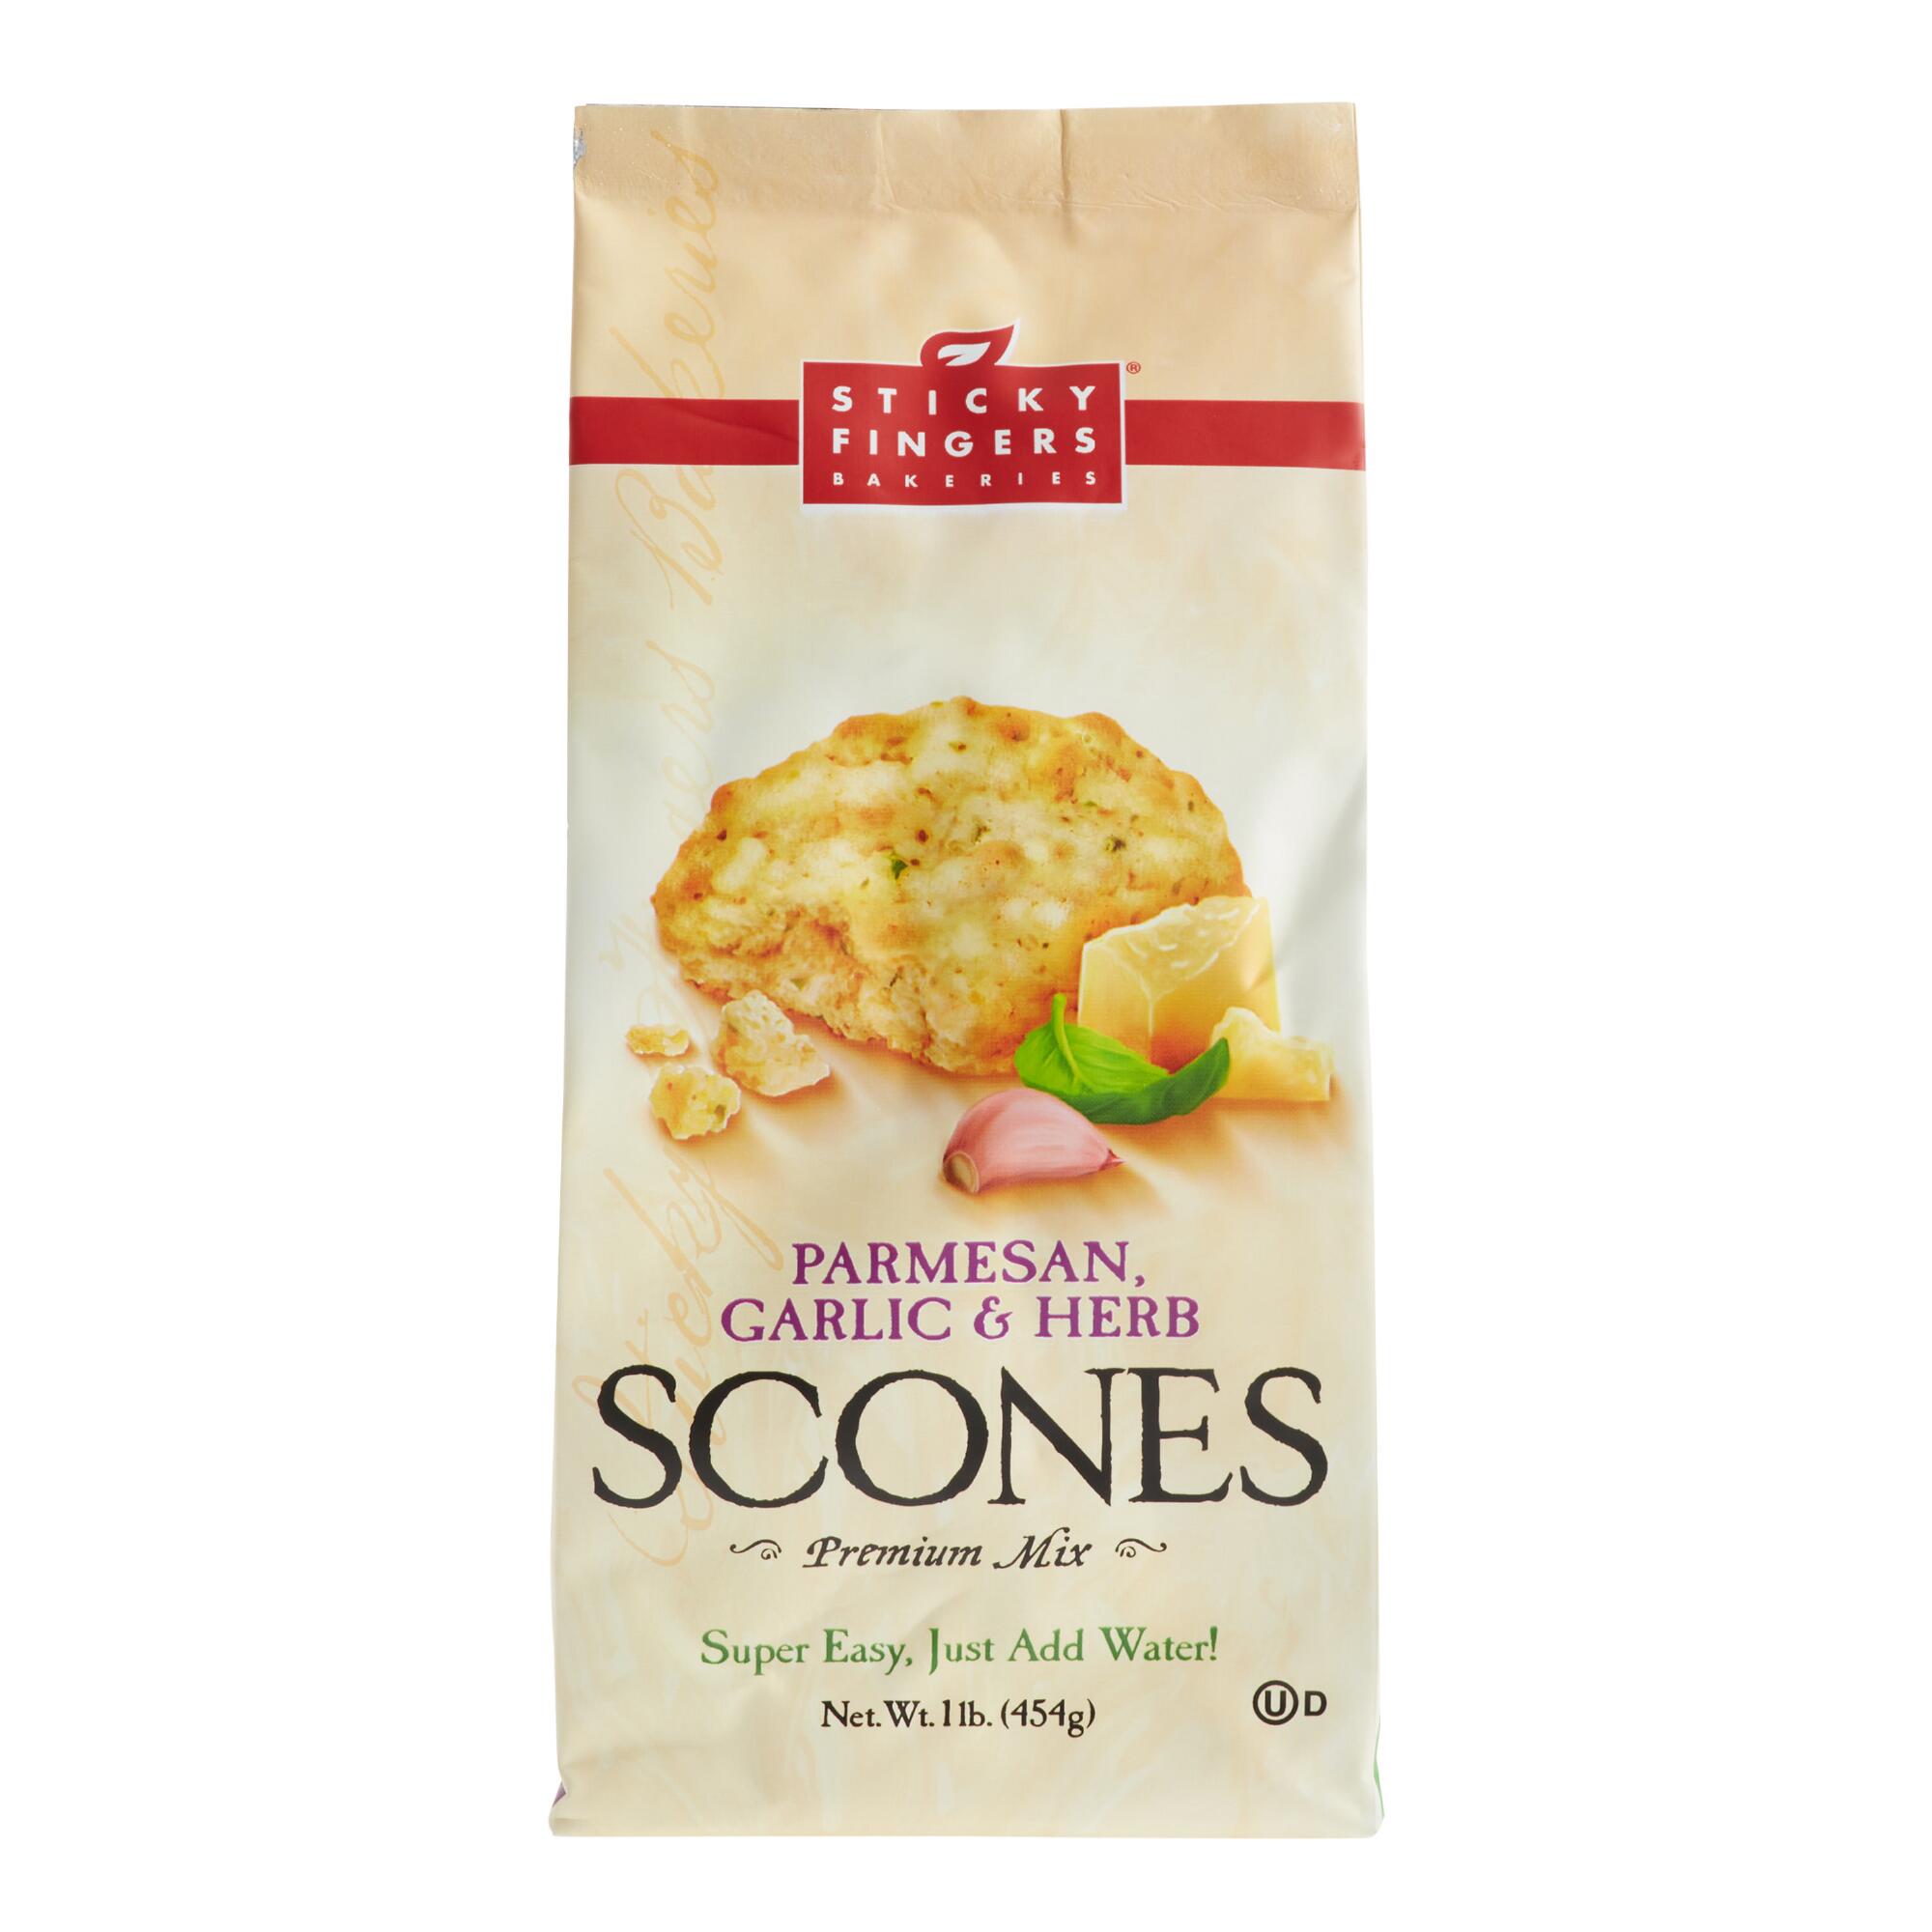 Sticky Fingers Parmesan, Garlic and Herb Scone Mix by World Market